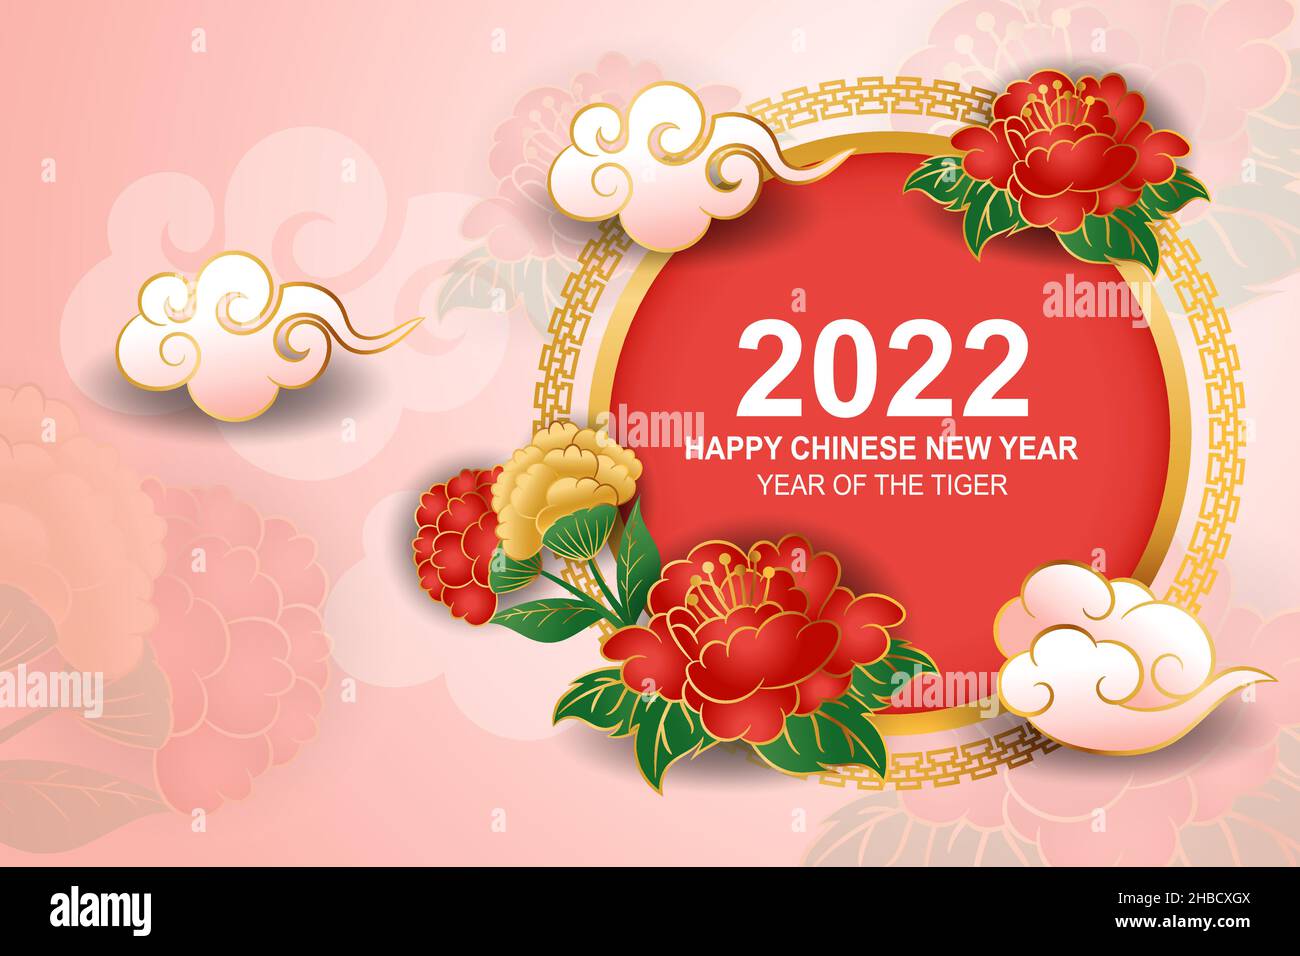 Chinese new year celebration festive background with red and golden floral ornament Stock Vector